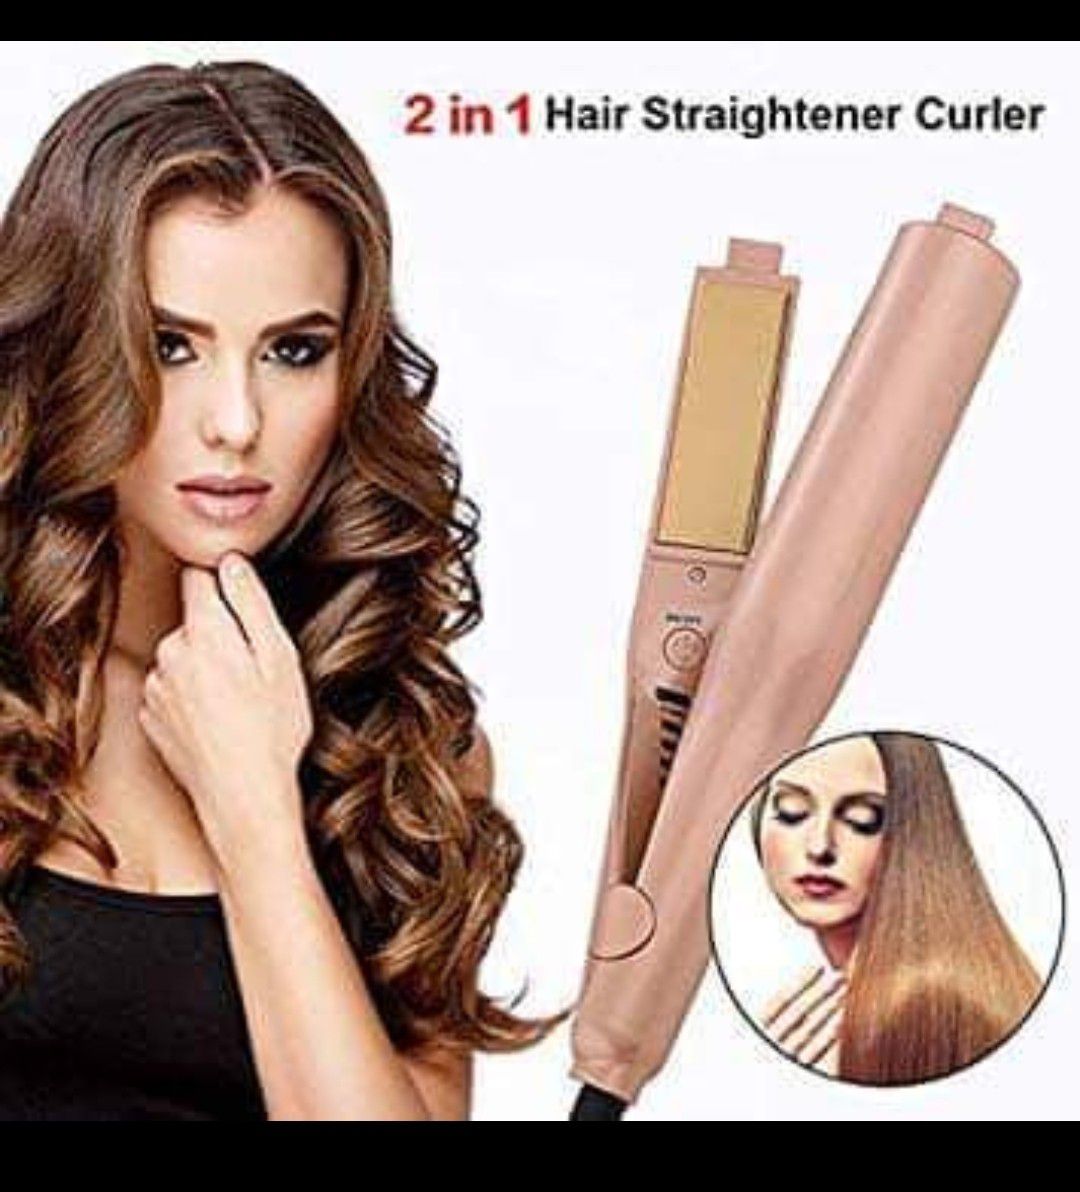 NEW!! 2 in 1 Hair straightener curler with ionic technology... $50